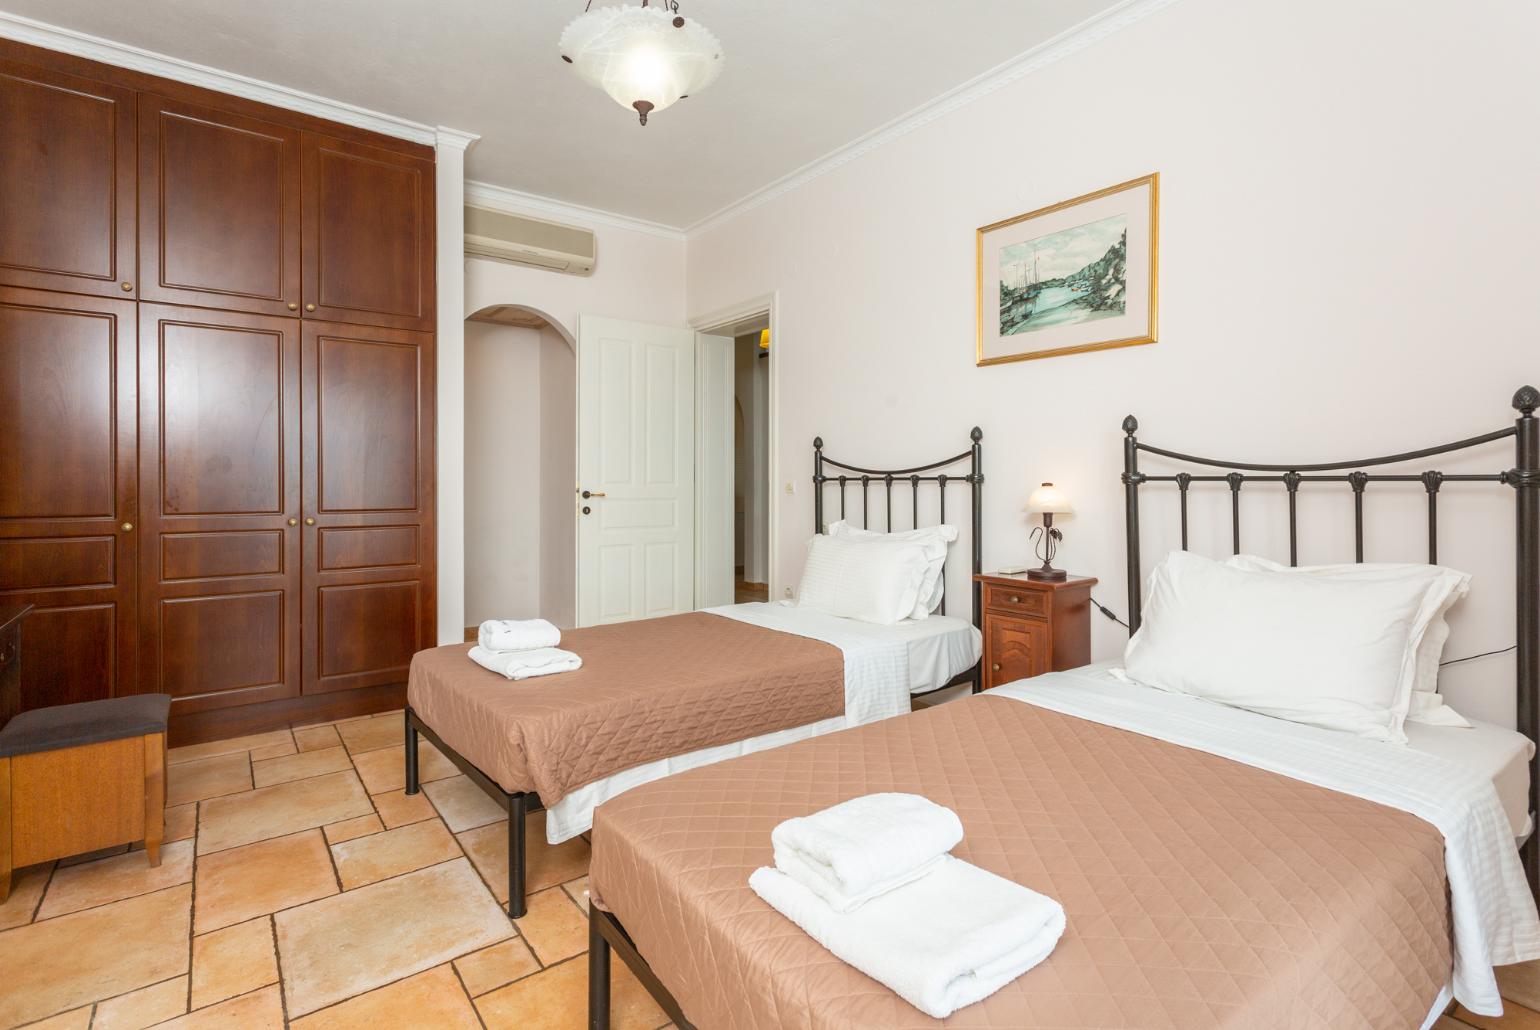 Twin bedroom with en suite bathroom, A/C, and pool terrace access with panoramic sea views